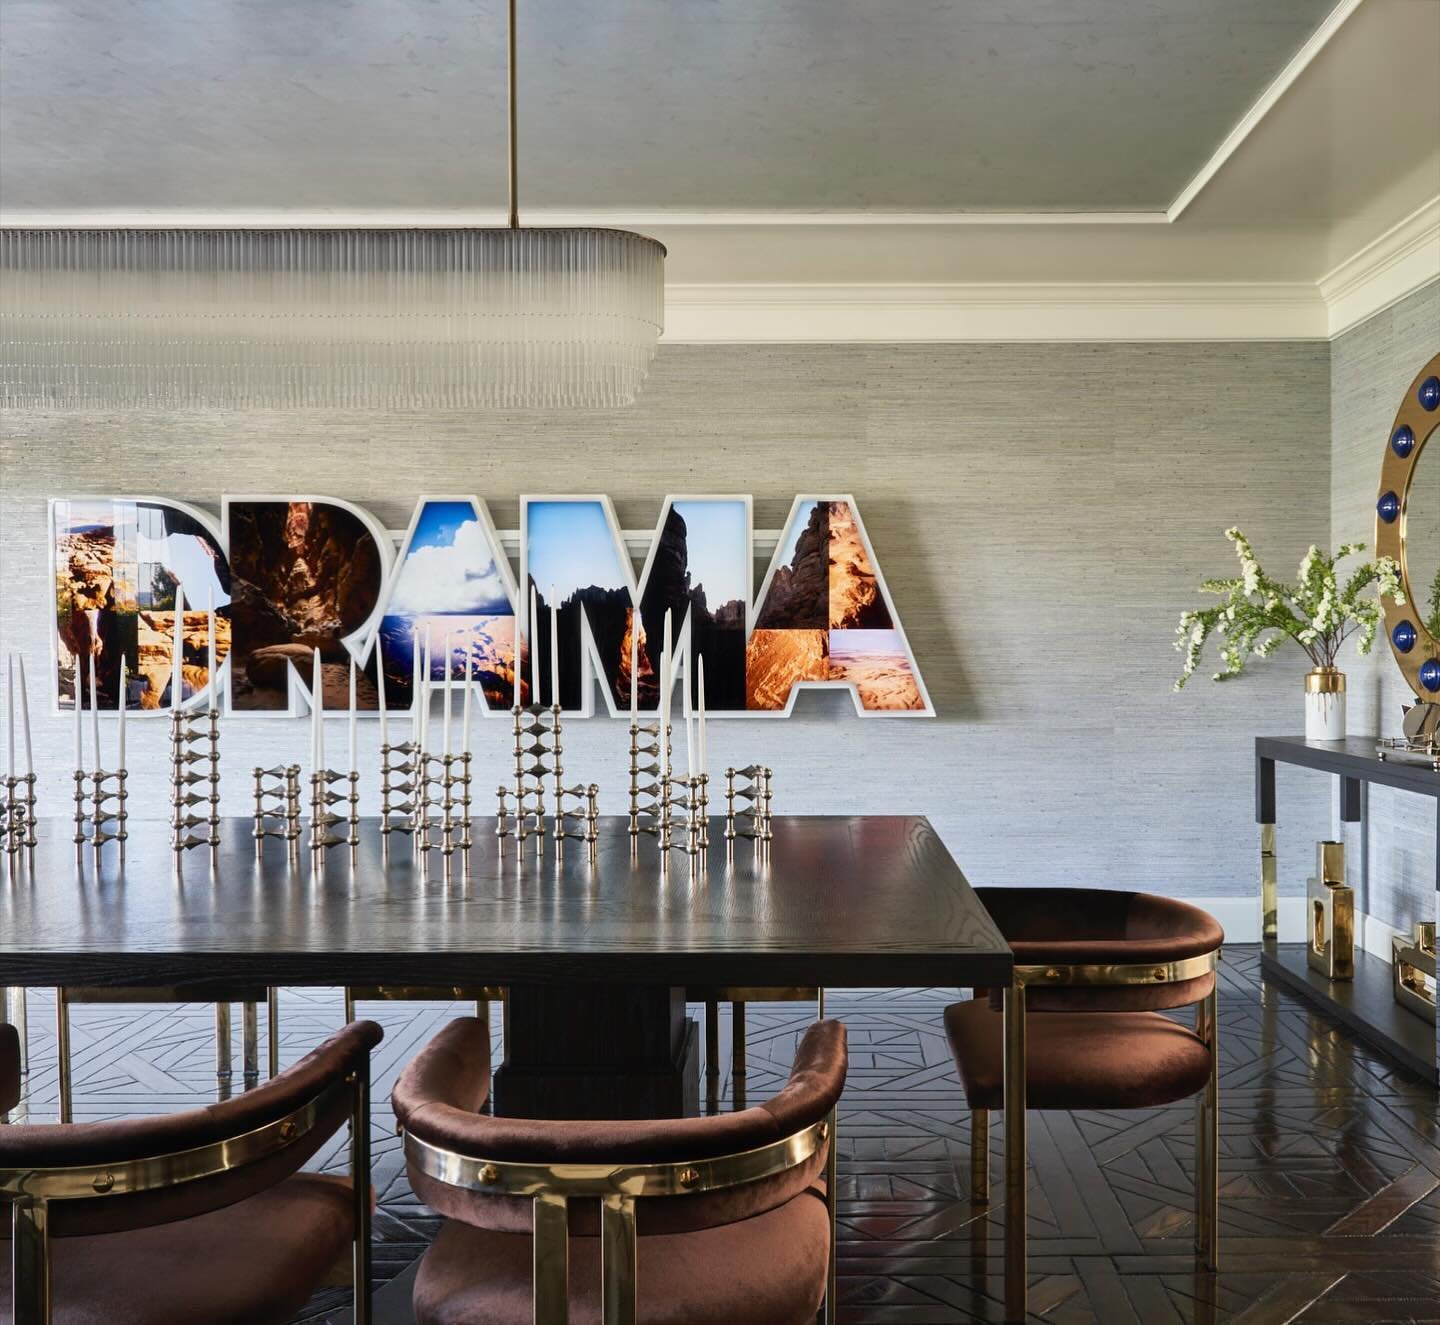 &ldquo;Drama 2&rdquo; by Doug Aitken in the dining room of a restored 1930&rsquo;s Beverly Hills estate. 

Design by @torreyllc 
Photo by @manoloyllera 
Contracting by @mgpartnersinc